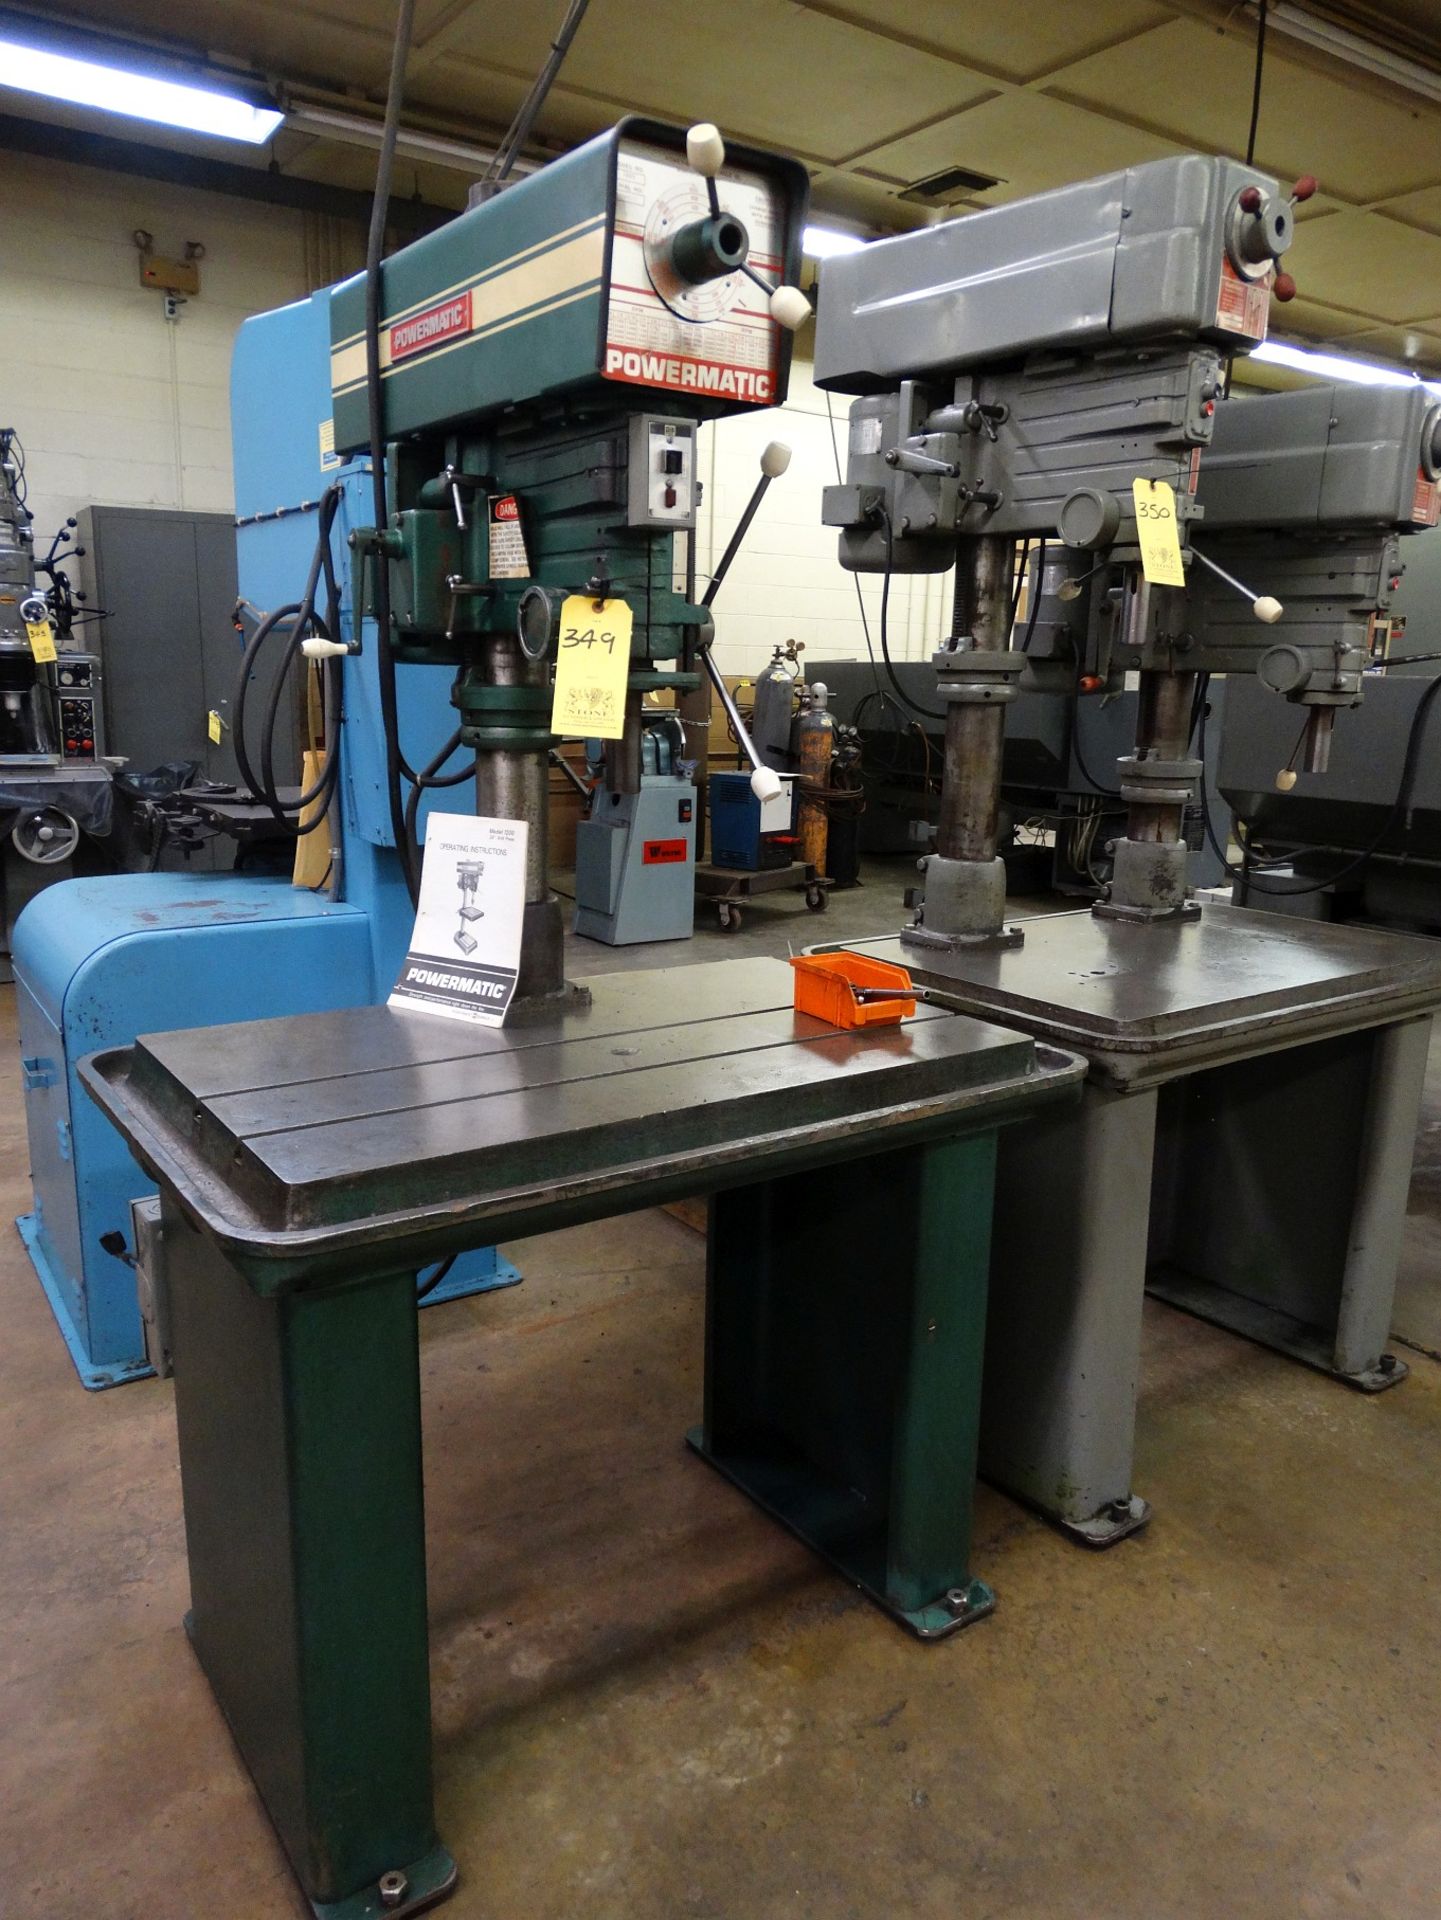 Powermatic Drill Press, Mdl 1200, 24" x 40" Table, 20", Variable Speed, SN 7920V084